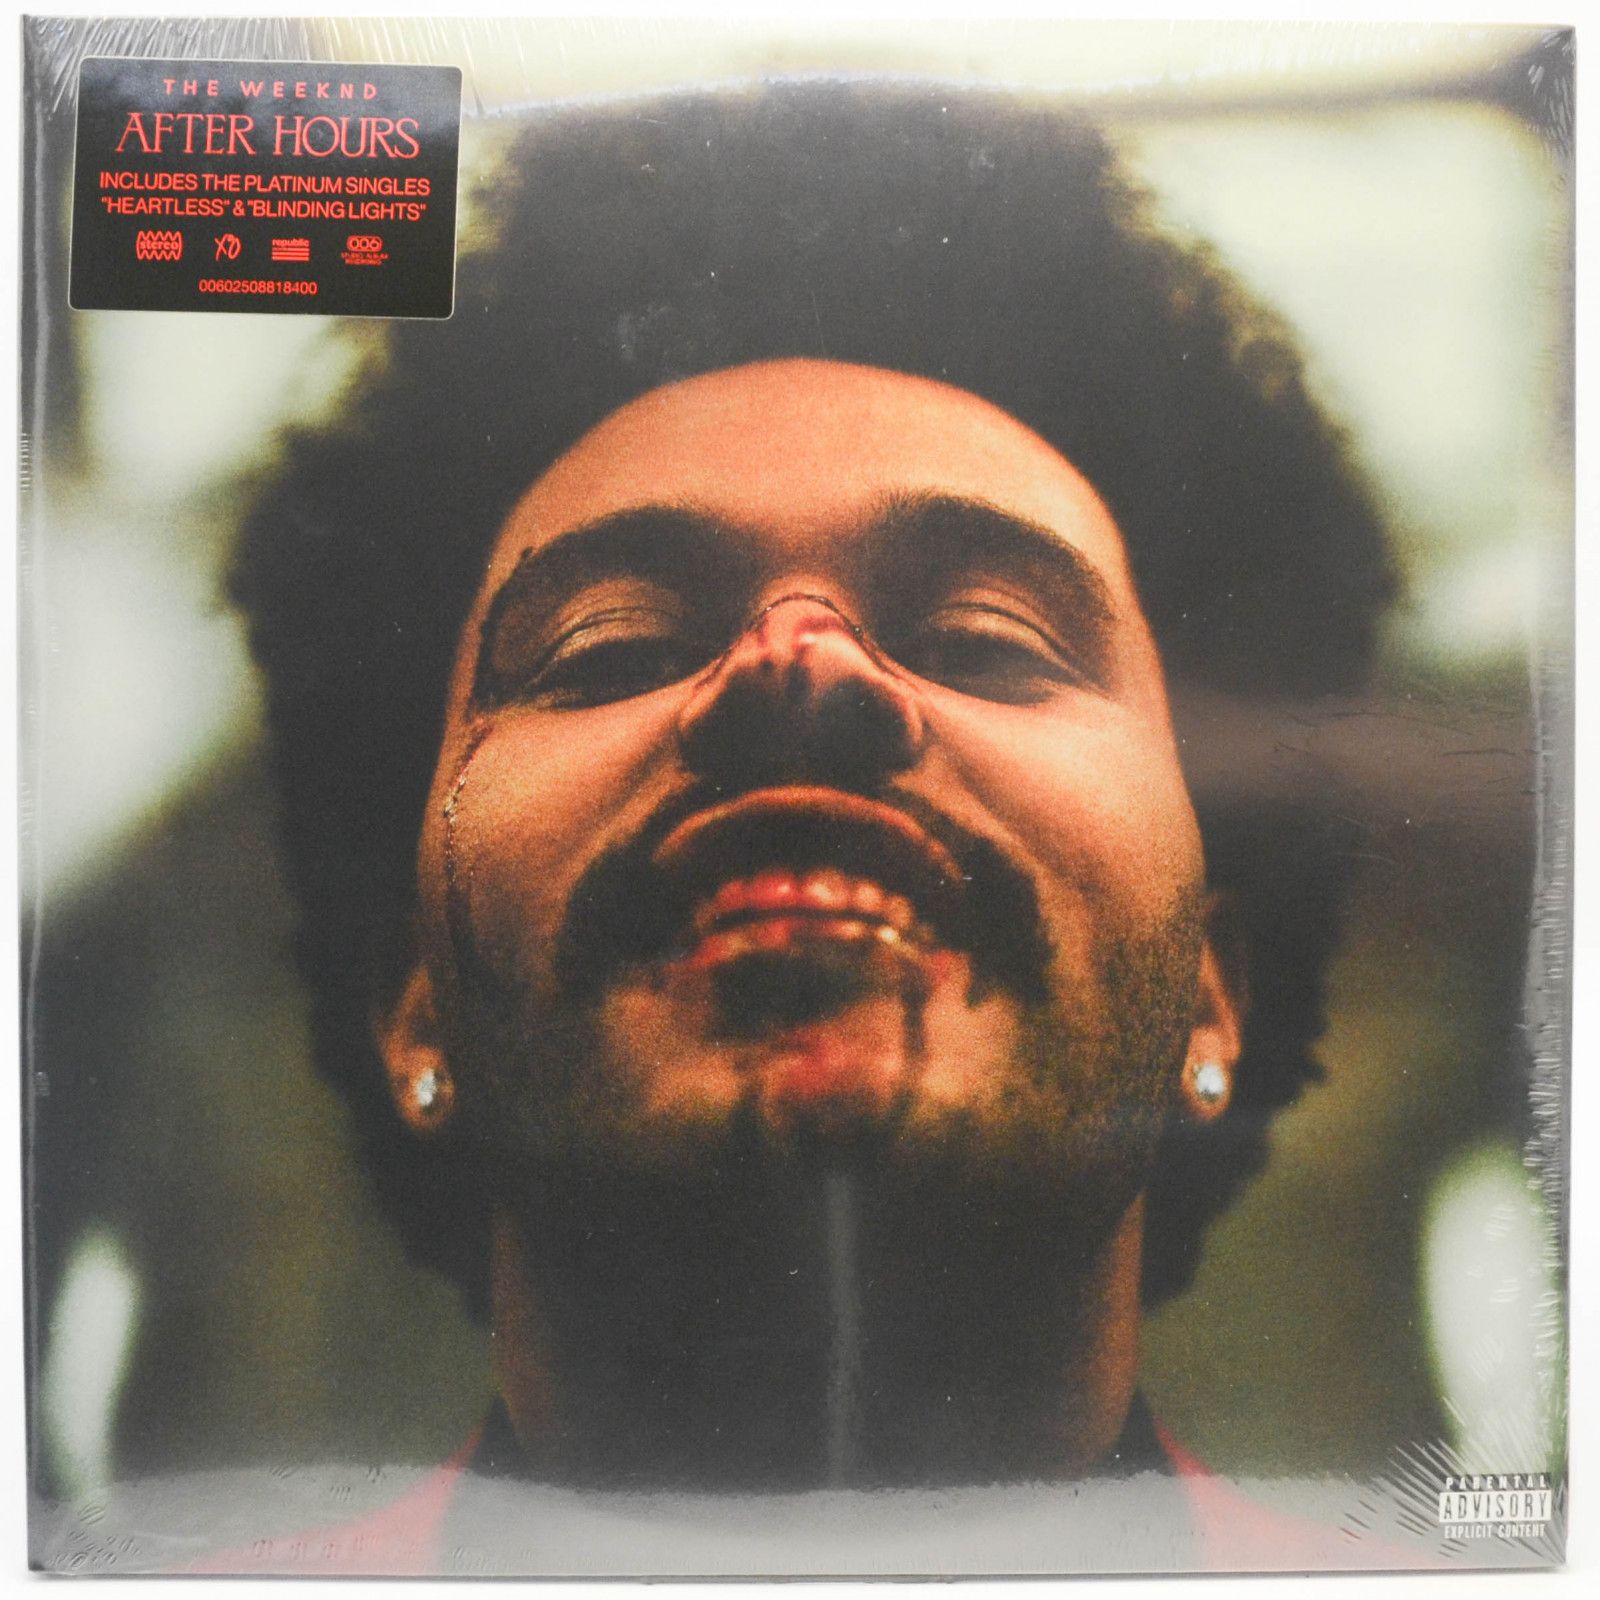 Weeknd — After Hours (2LP), 2020